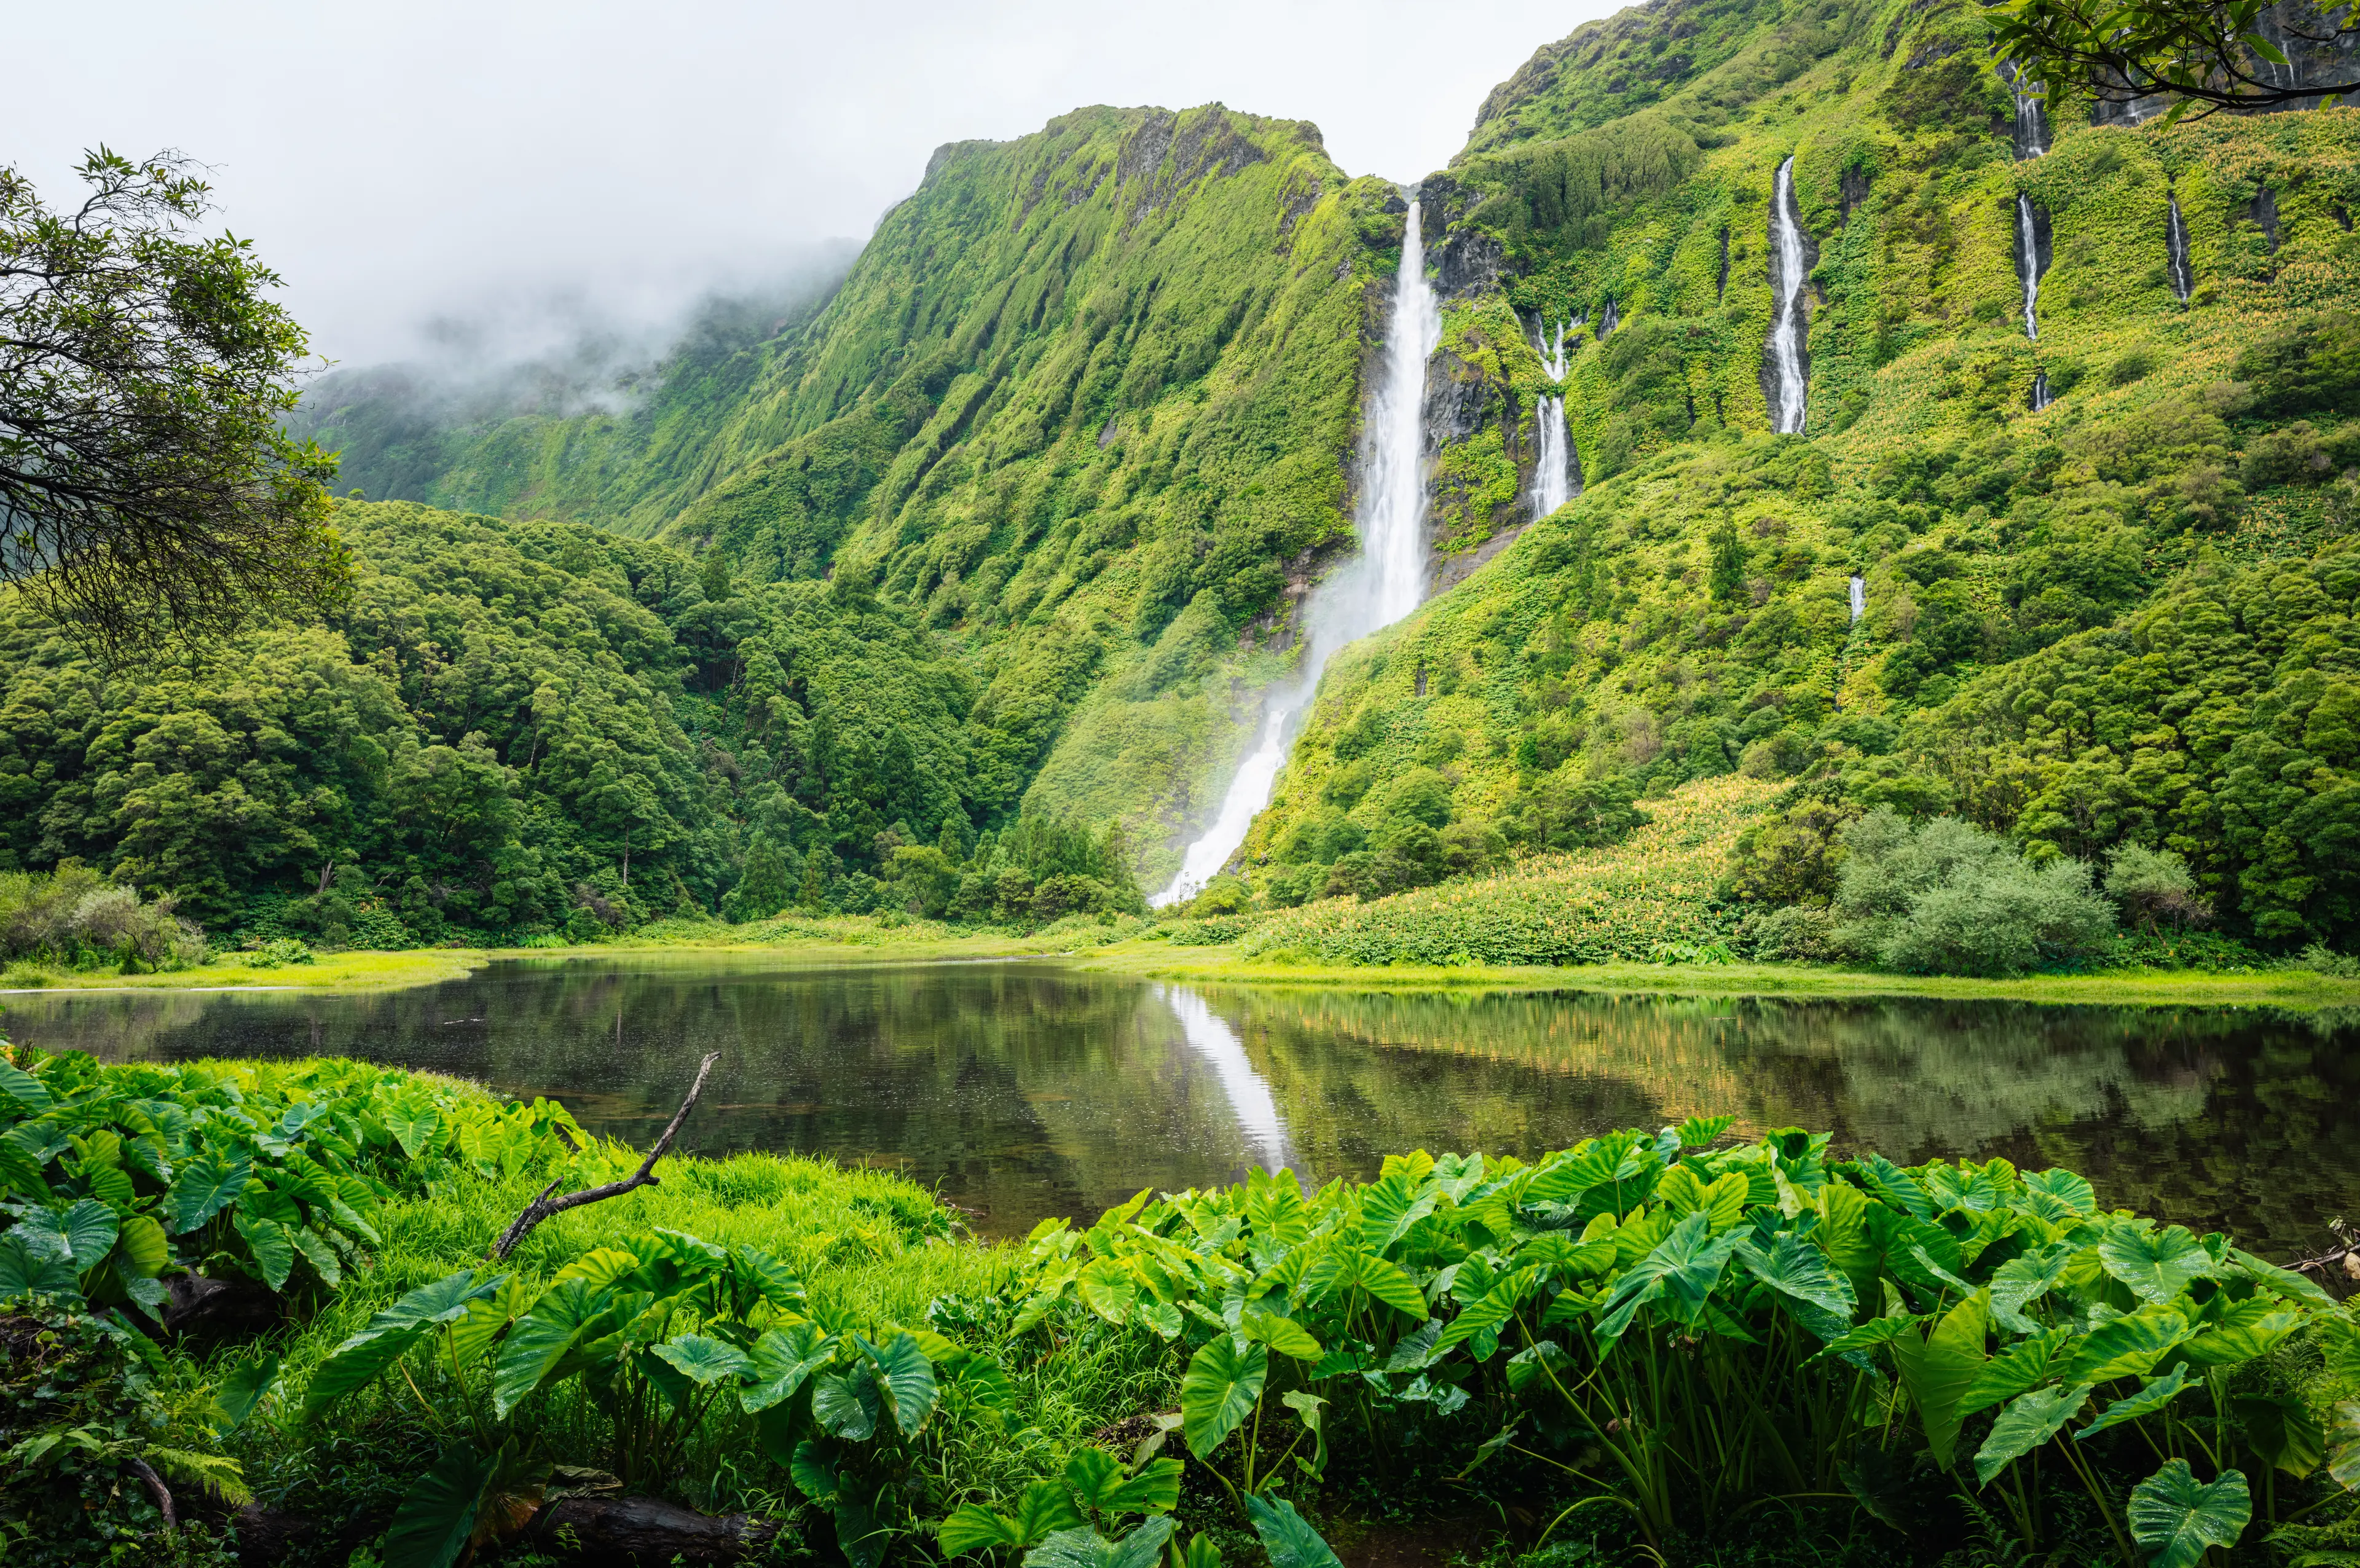 5-Day Solo Retreat: Relaxation and Shopping in Azores, Portugal